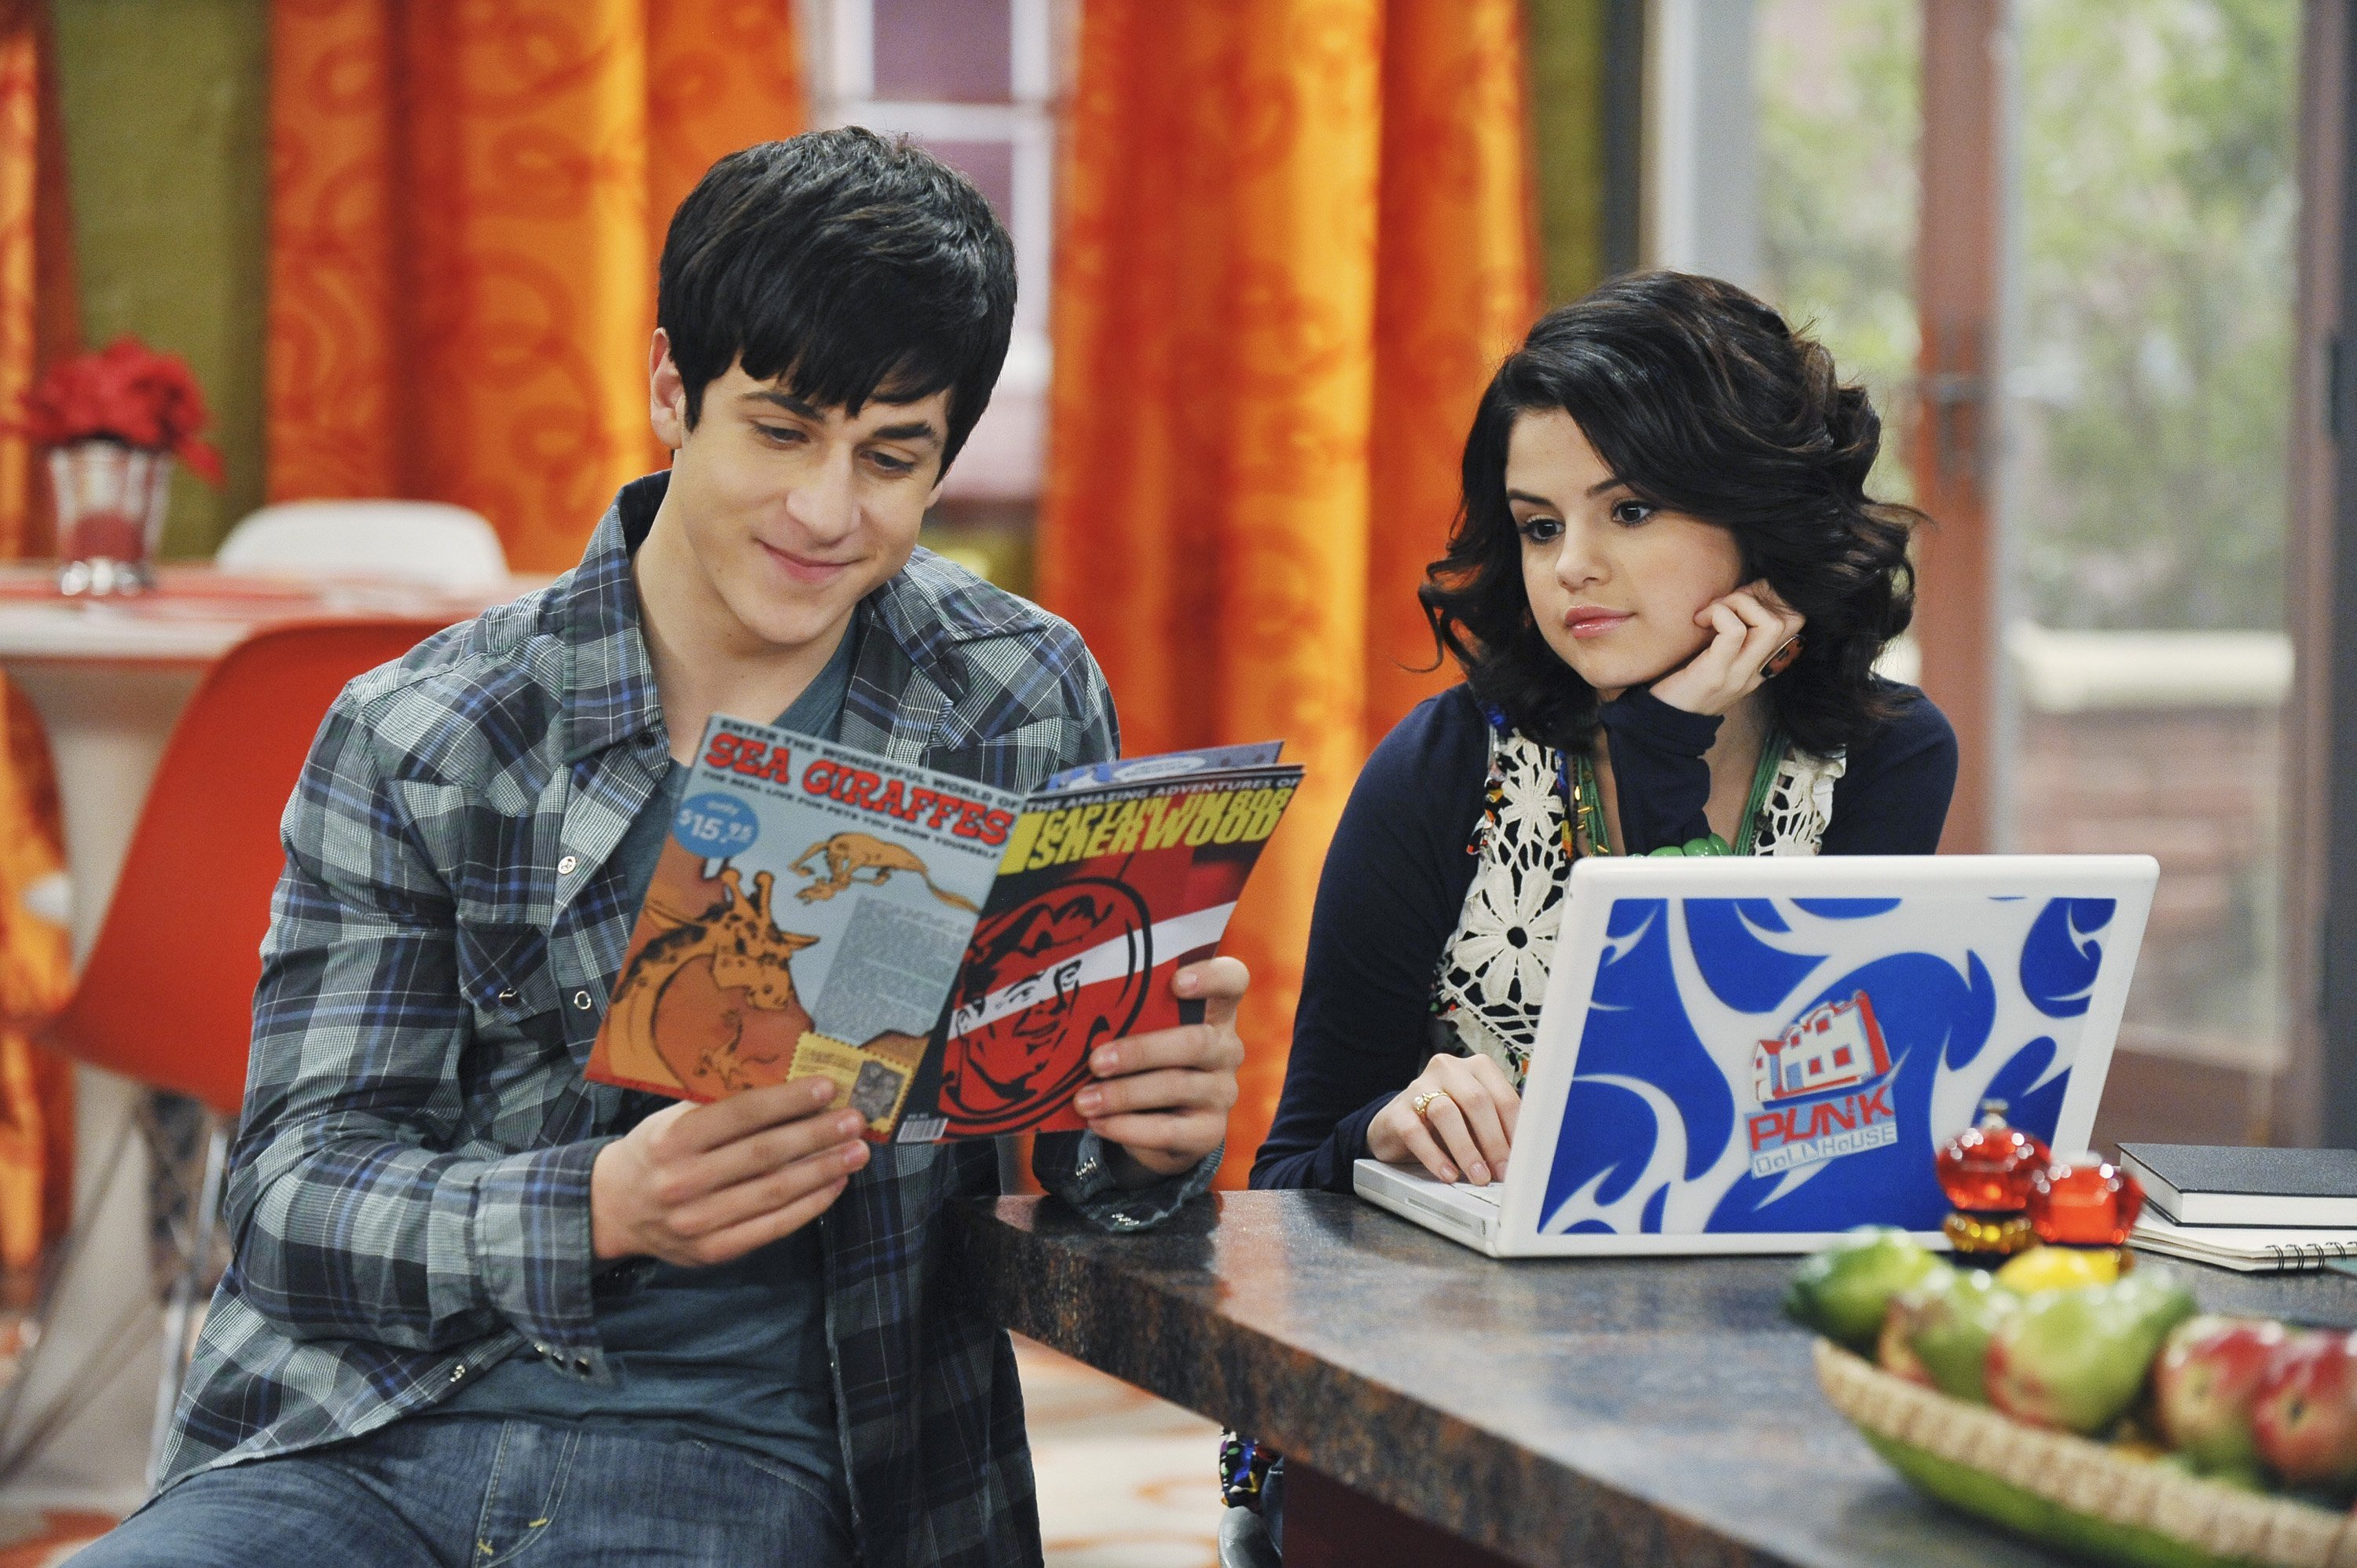 Wizards of Waverly Place': Here Are 5 of the Most Relatable Quotes From Alex  Russo